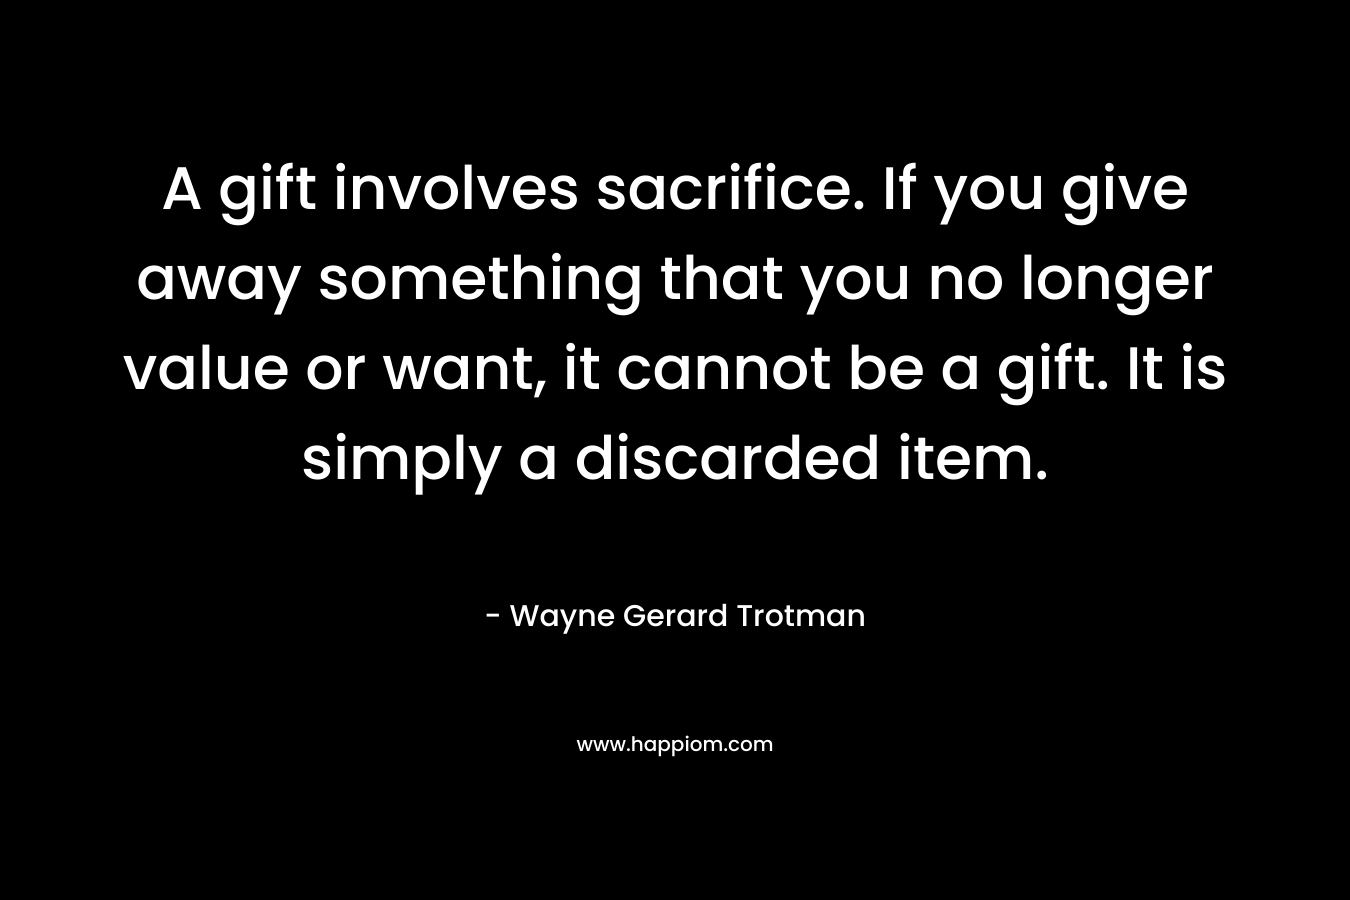 A gift involves sacrifice. If you give away something that you no longer value or want, it cannot be a gift. It is simply a discarded item.